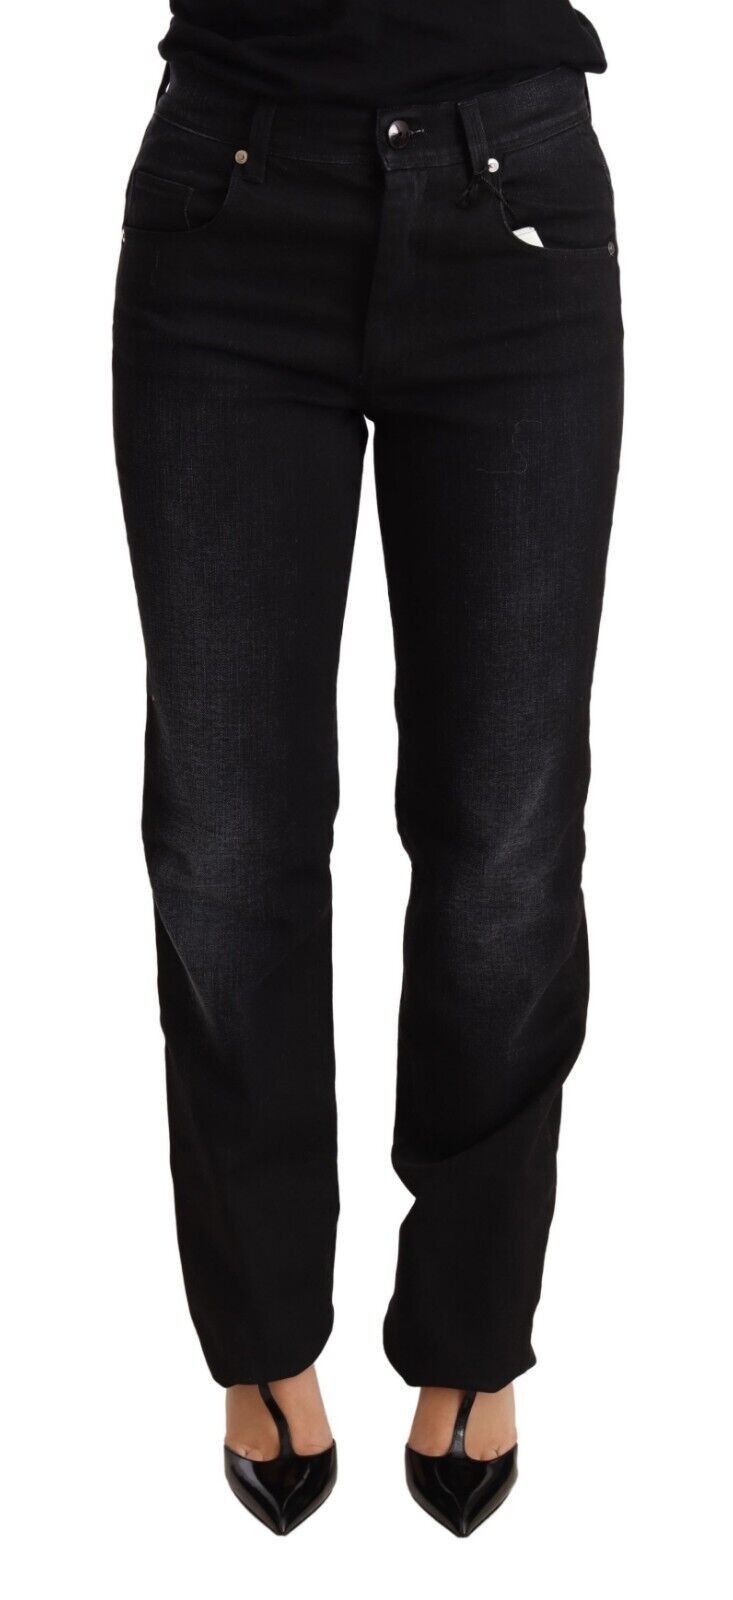 Ermanno Scervino Chic Black Washed Straight Cut Women's Jeans